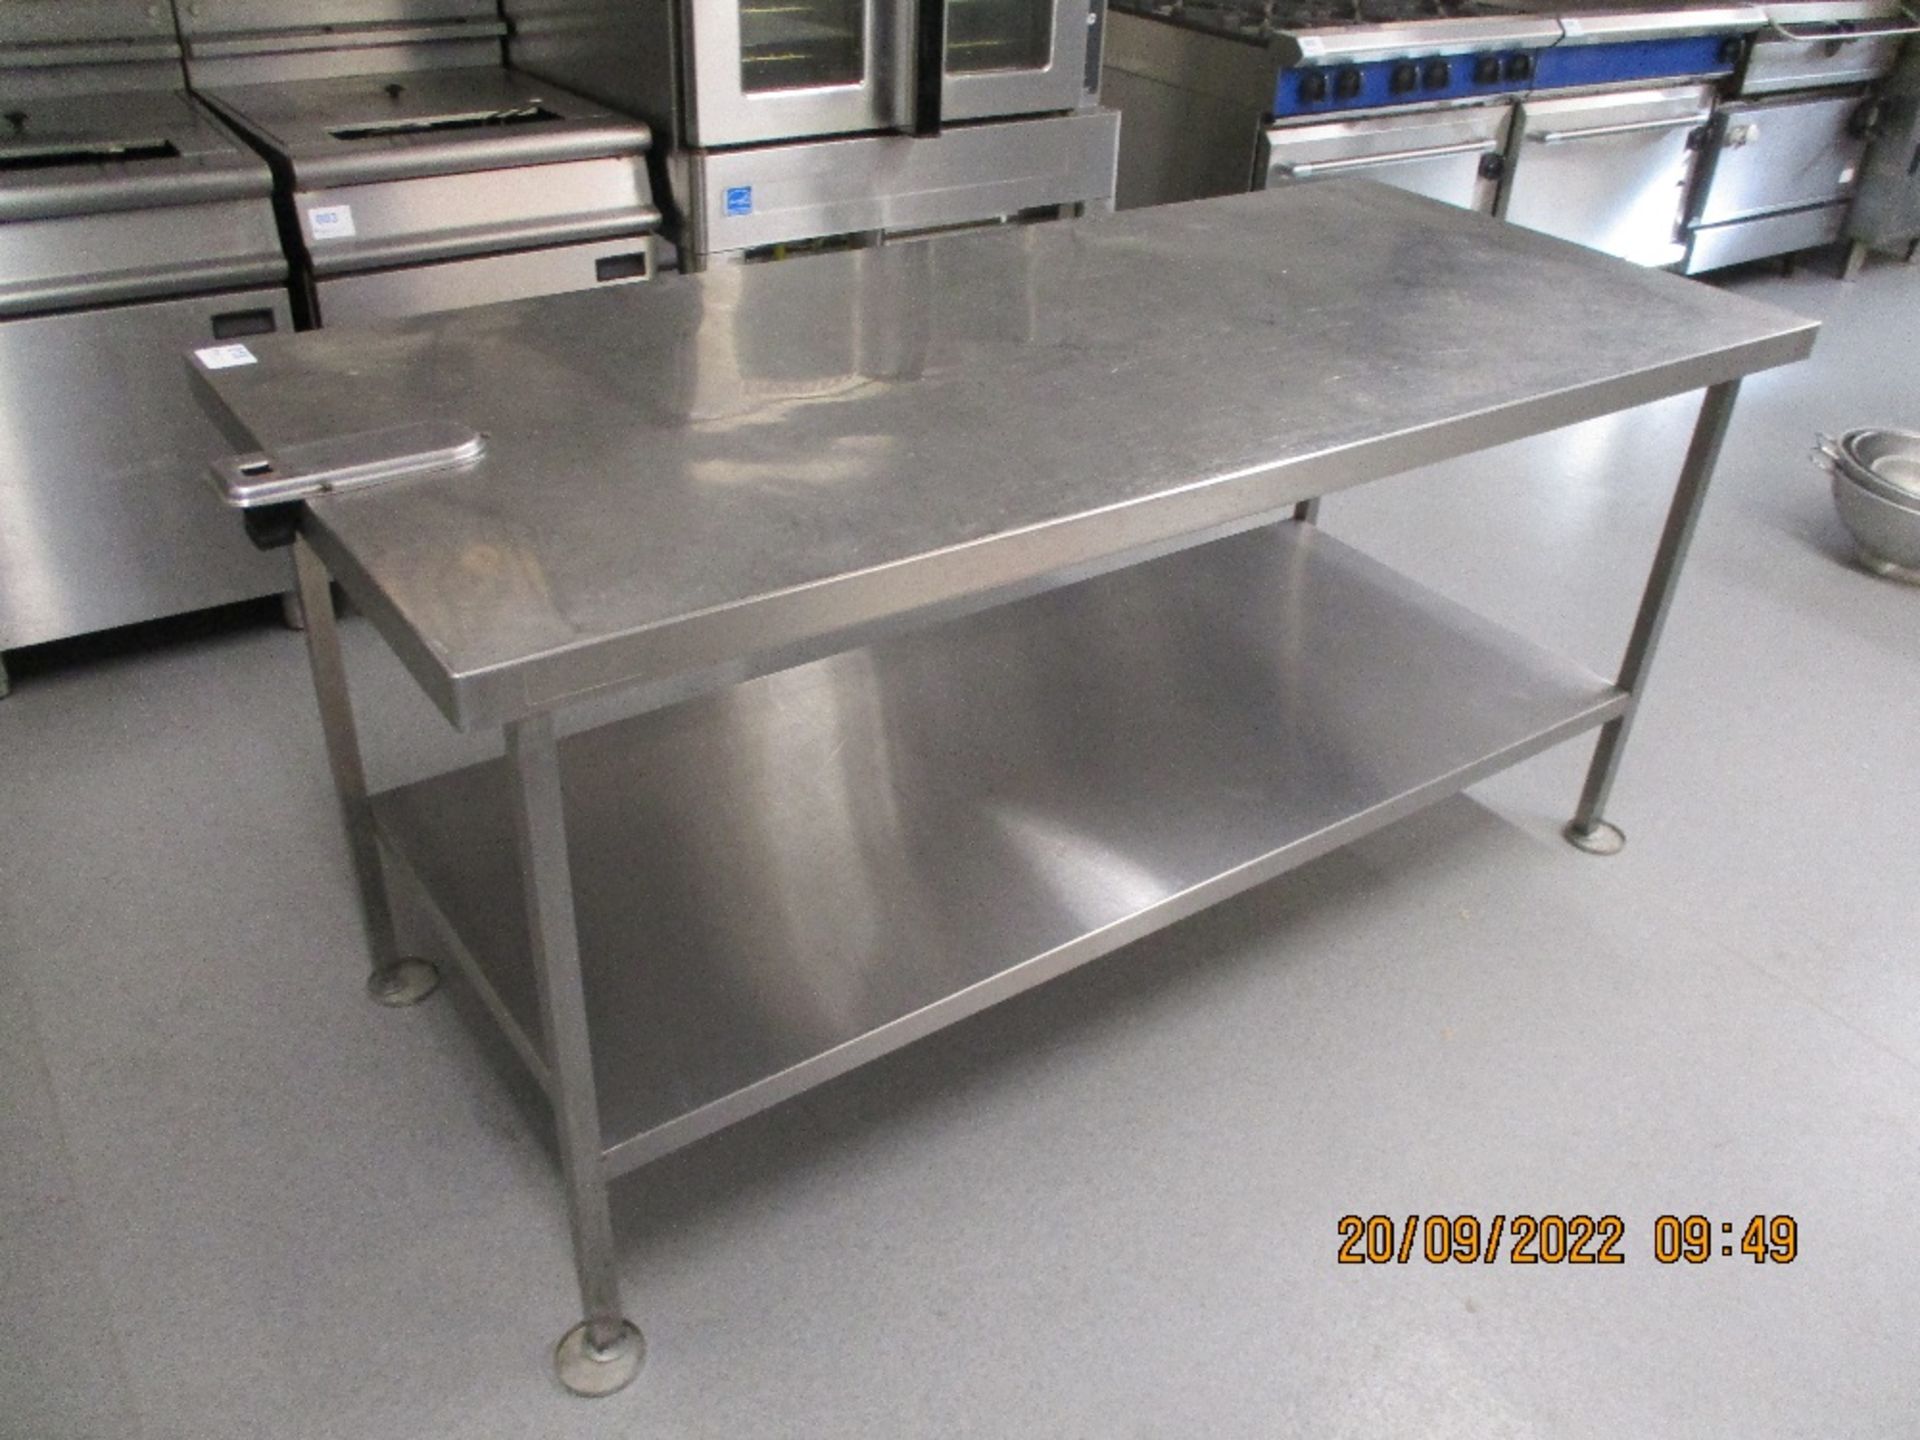 Stainless Steel Prep Tables - Image 2 of 3